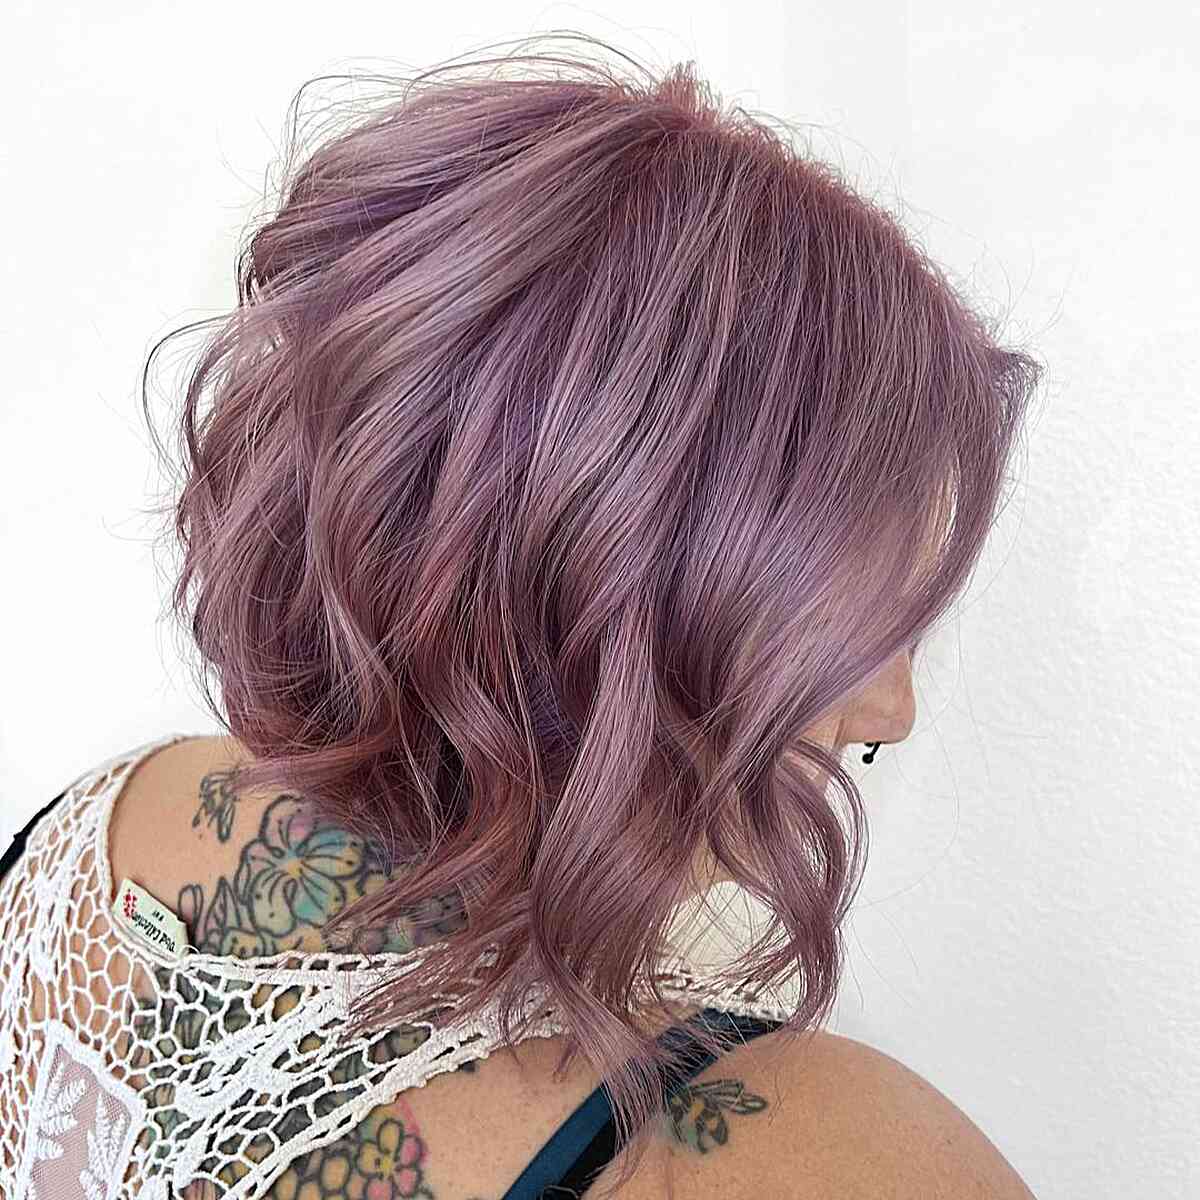 Purple hairstyle with pink highlights